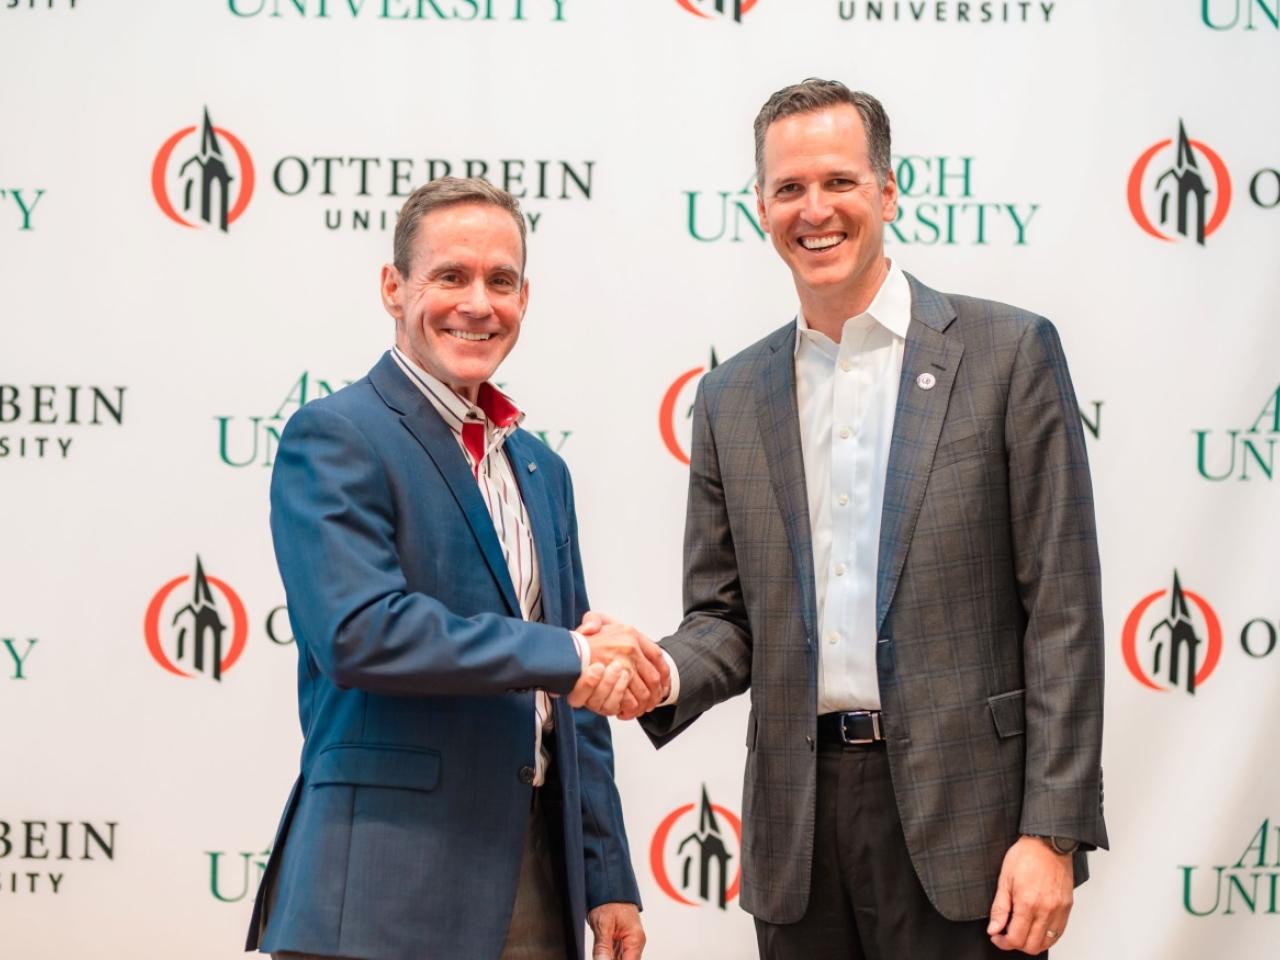 William R. Groves, J.D., chancellor of Antioch University, and John Comerford, Ph.D., president of Otterbein University, shake hands after the historic announcement of their institutions' intention to affiliate with each other to create a unique, national, nonprofit university system focused on educating students both for careers and to prepare students to advance social justice, democracy, and the common good.